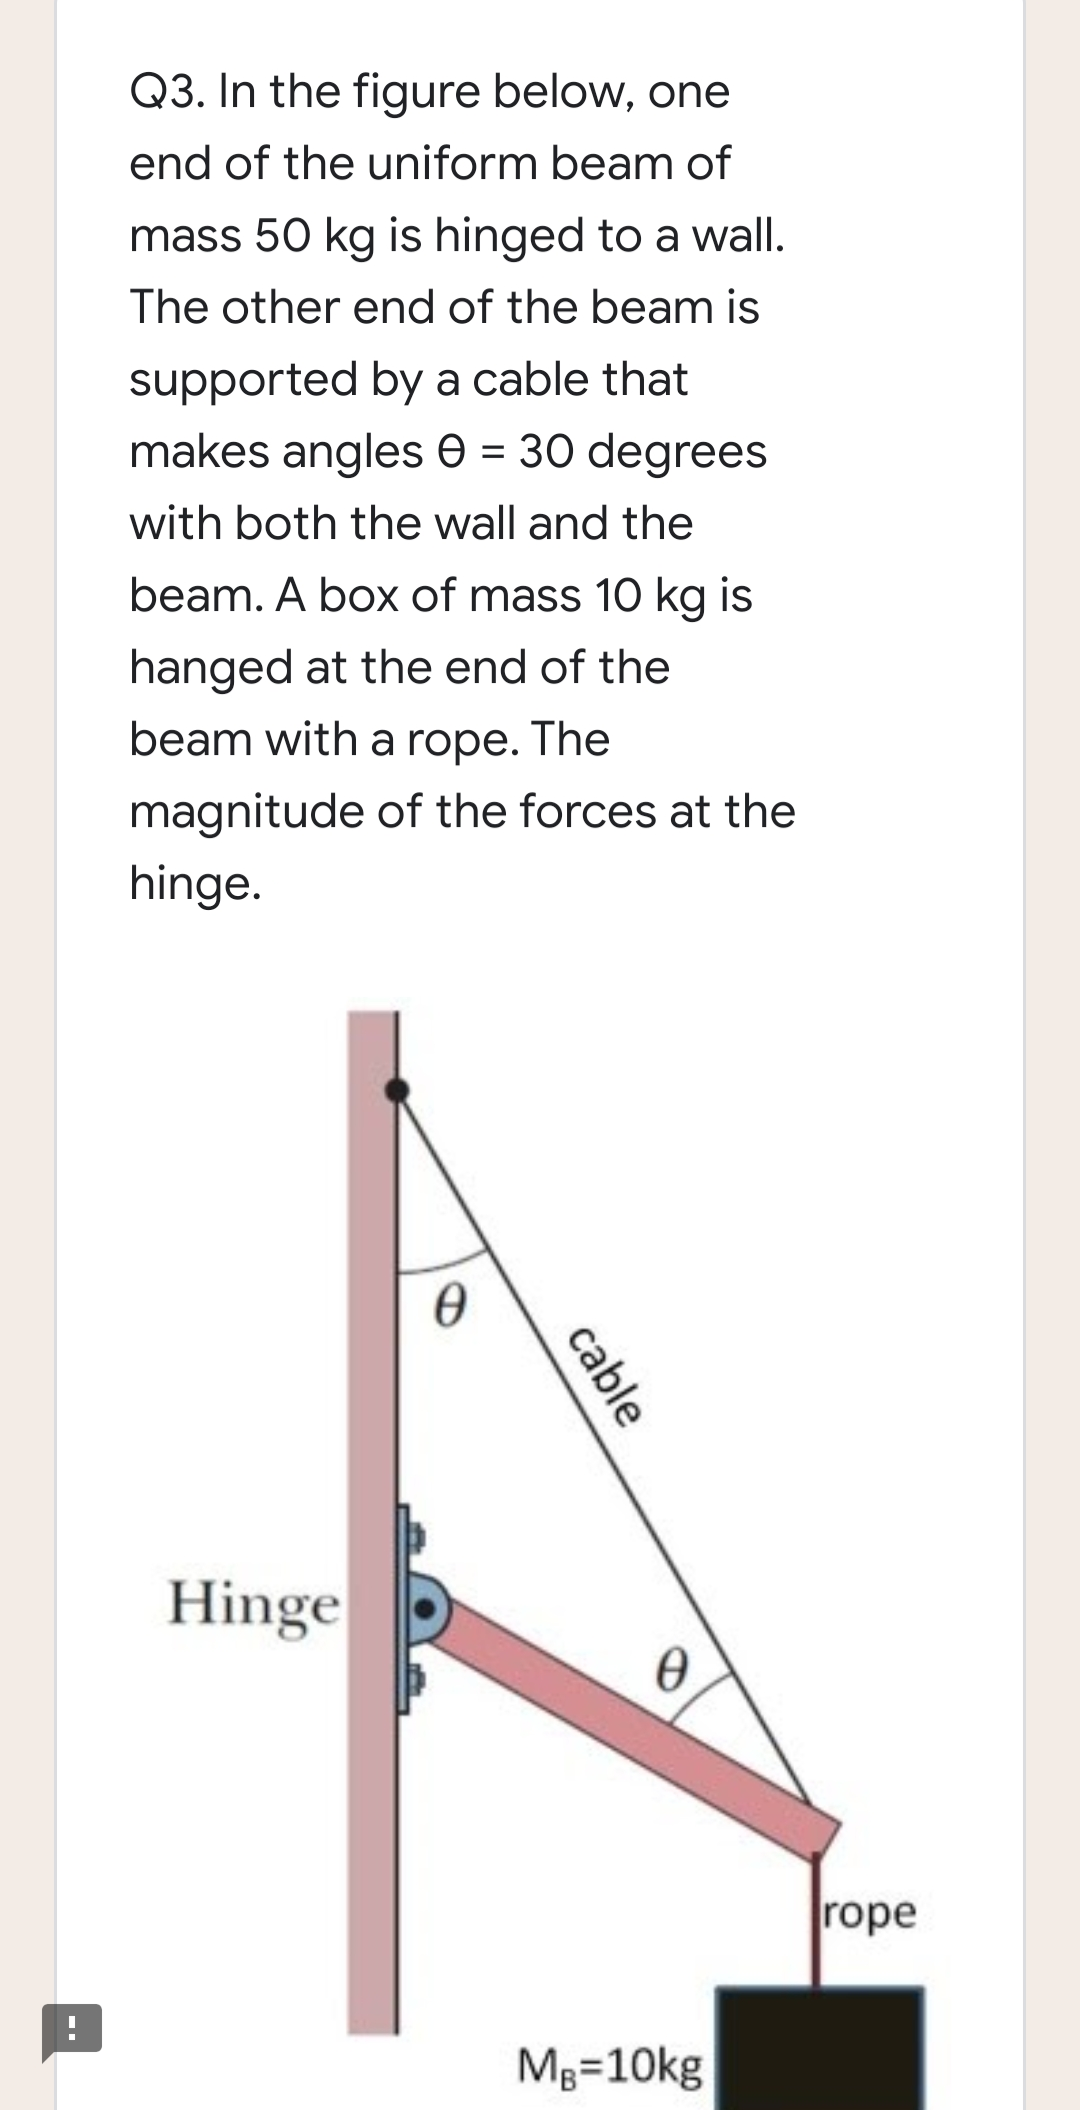 Q3. In the figure below, one
end of the uniform beam of
mass 50 kg is hinged to a wall.
The other end of the beam is
supported by a cable that
makes angles e = 30 degrees
with both the wall and the
beam. A box of mass 10 kg is
hanged at the end of the
beam with a rope. The
magnitude of the forces at the
hinge.
Hinge
rope
Mg=10kg
cable
-.
